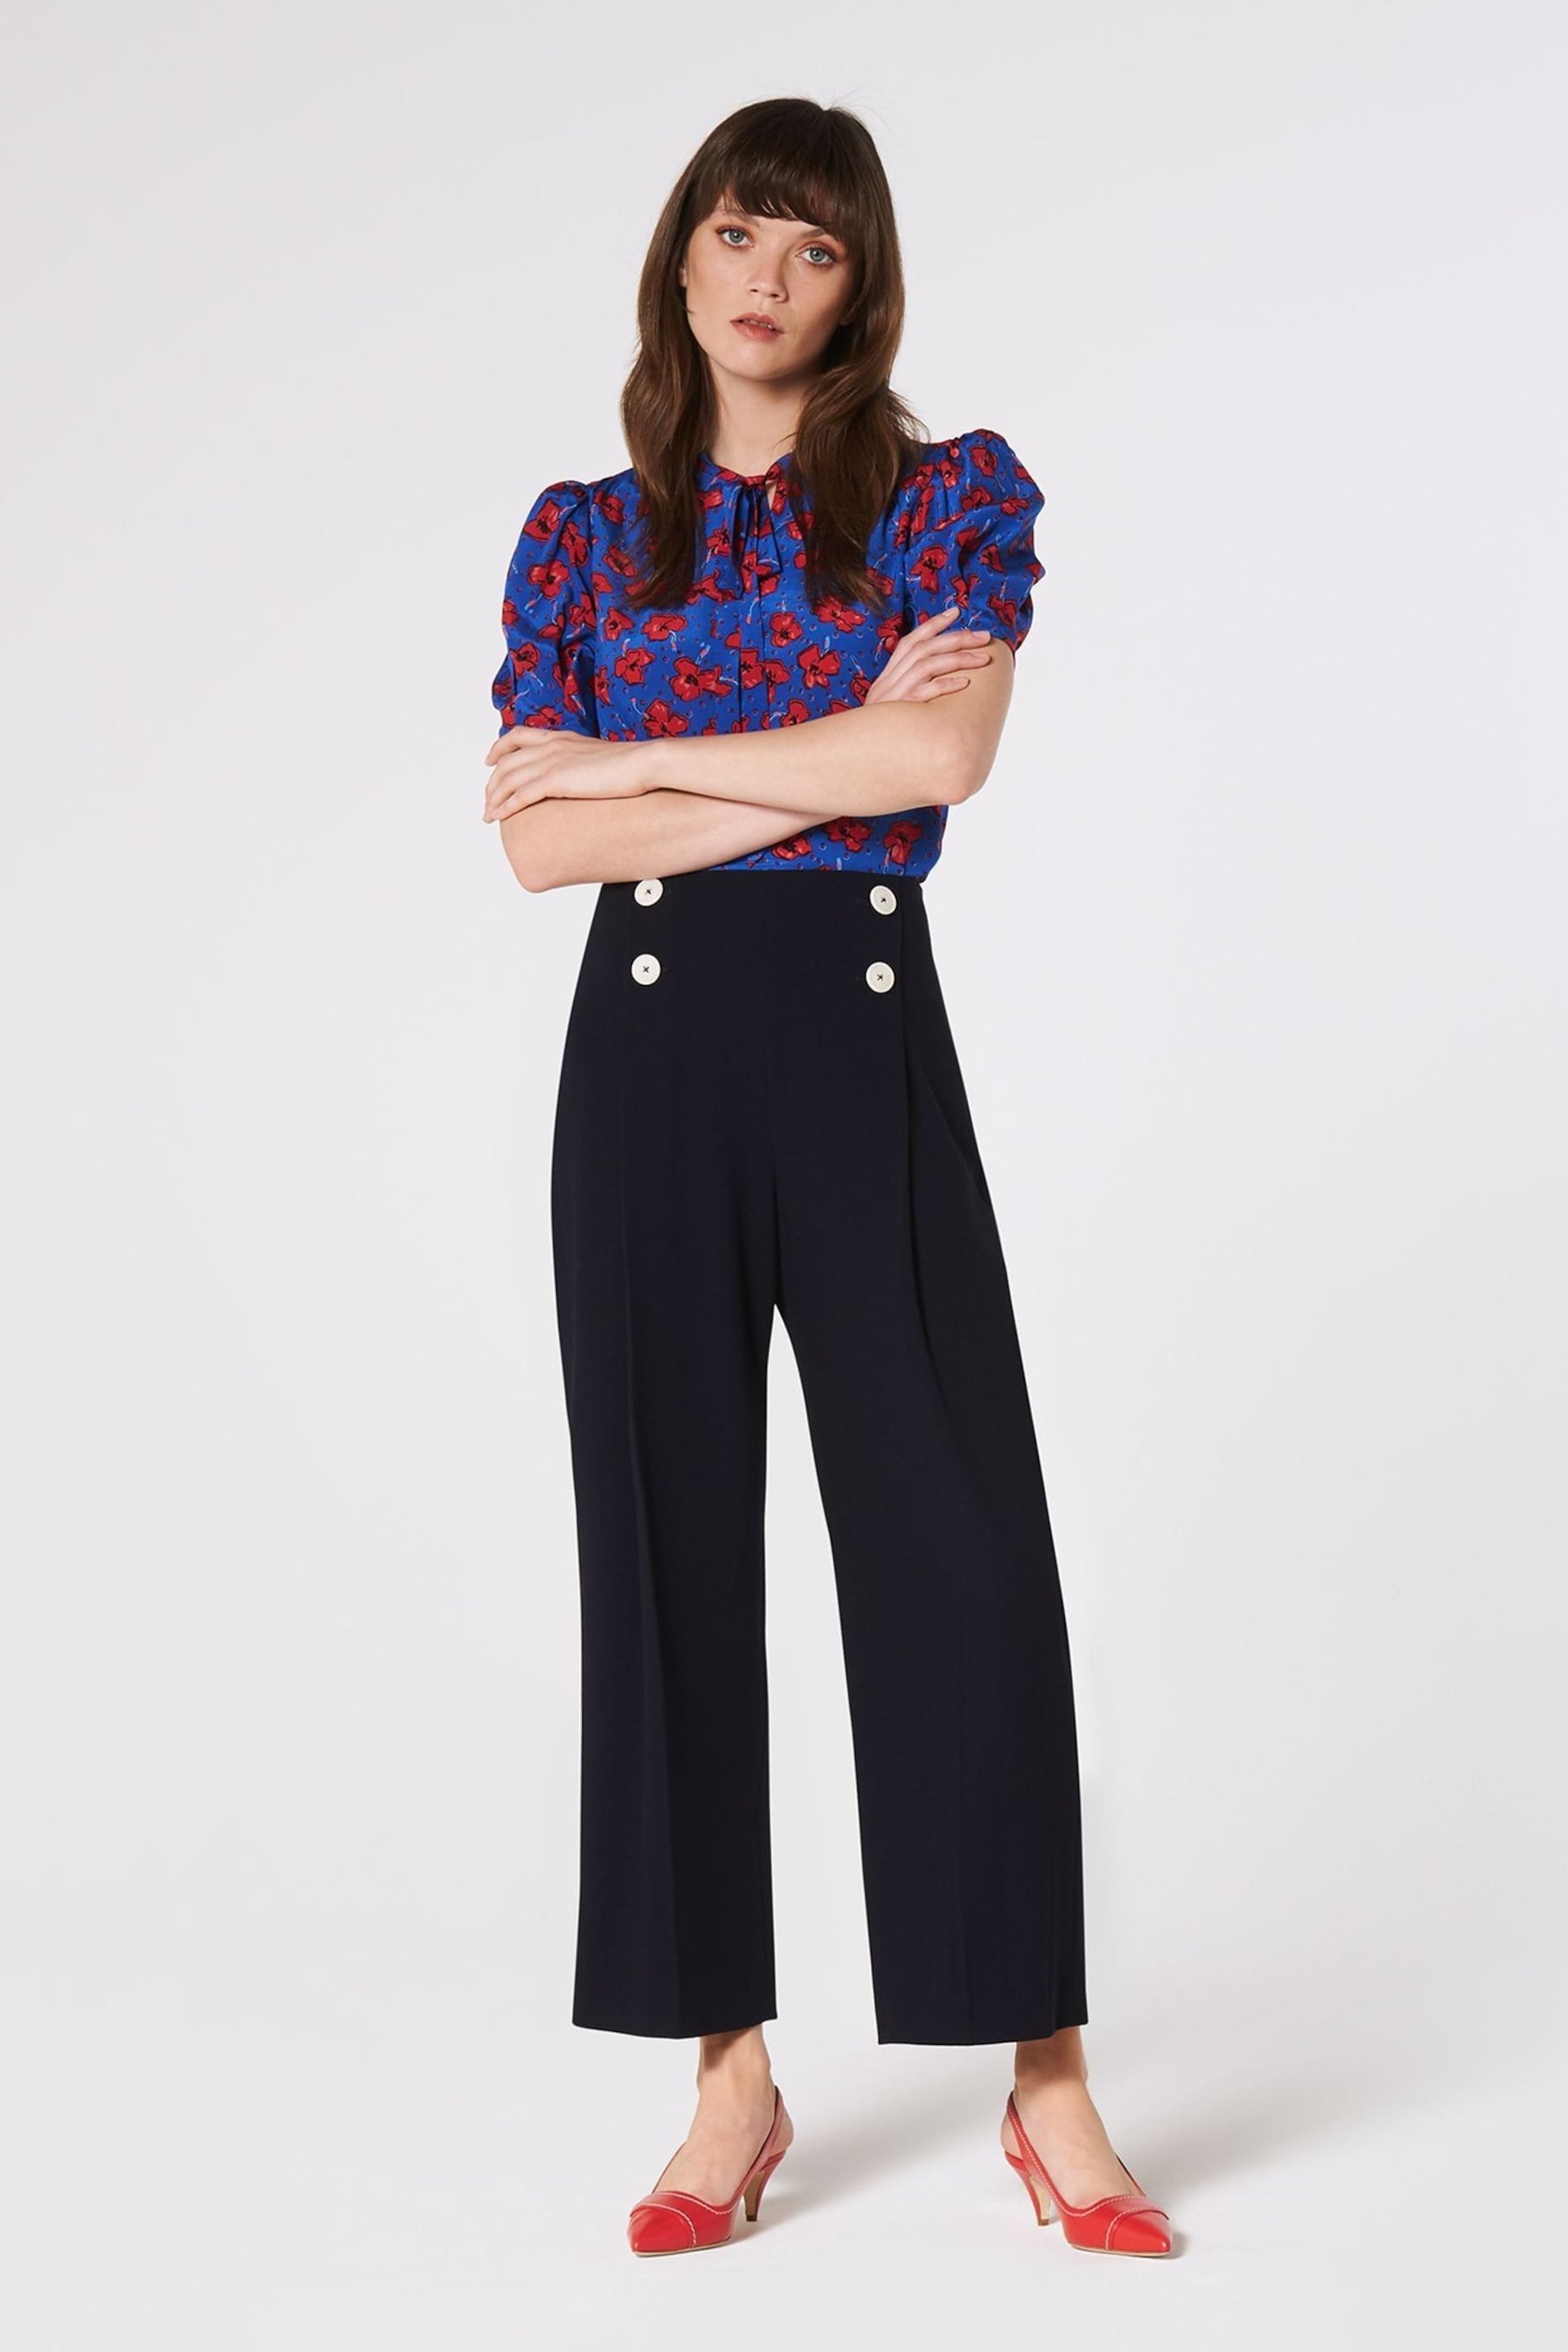 LK Bennett Parker Button Front Trousers - Image 1 of 4